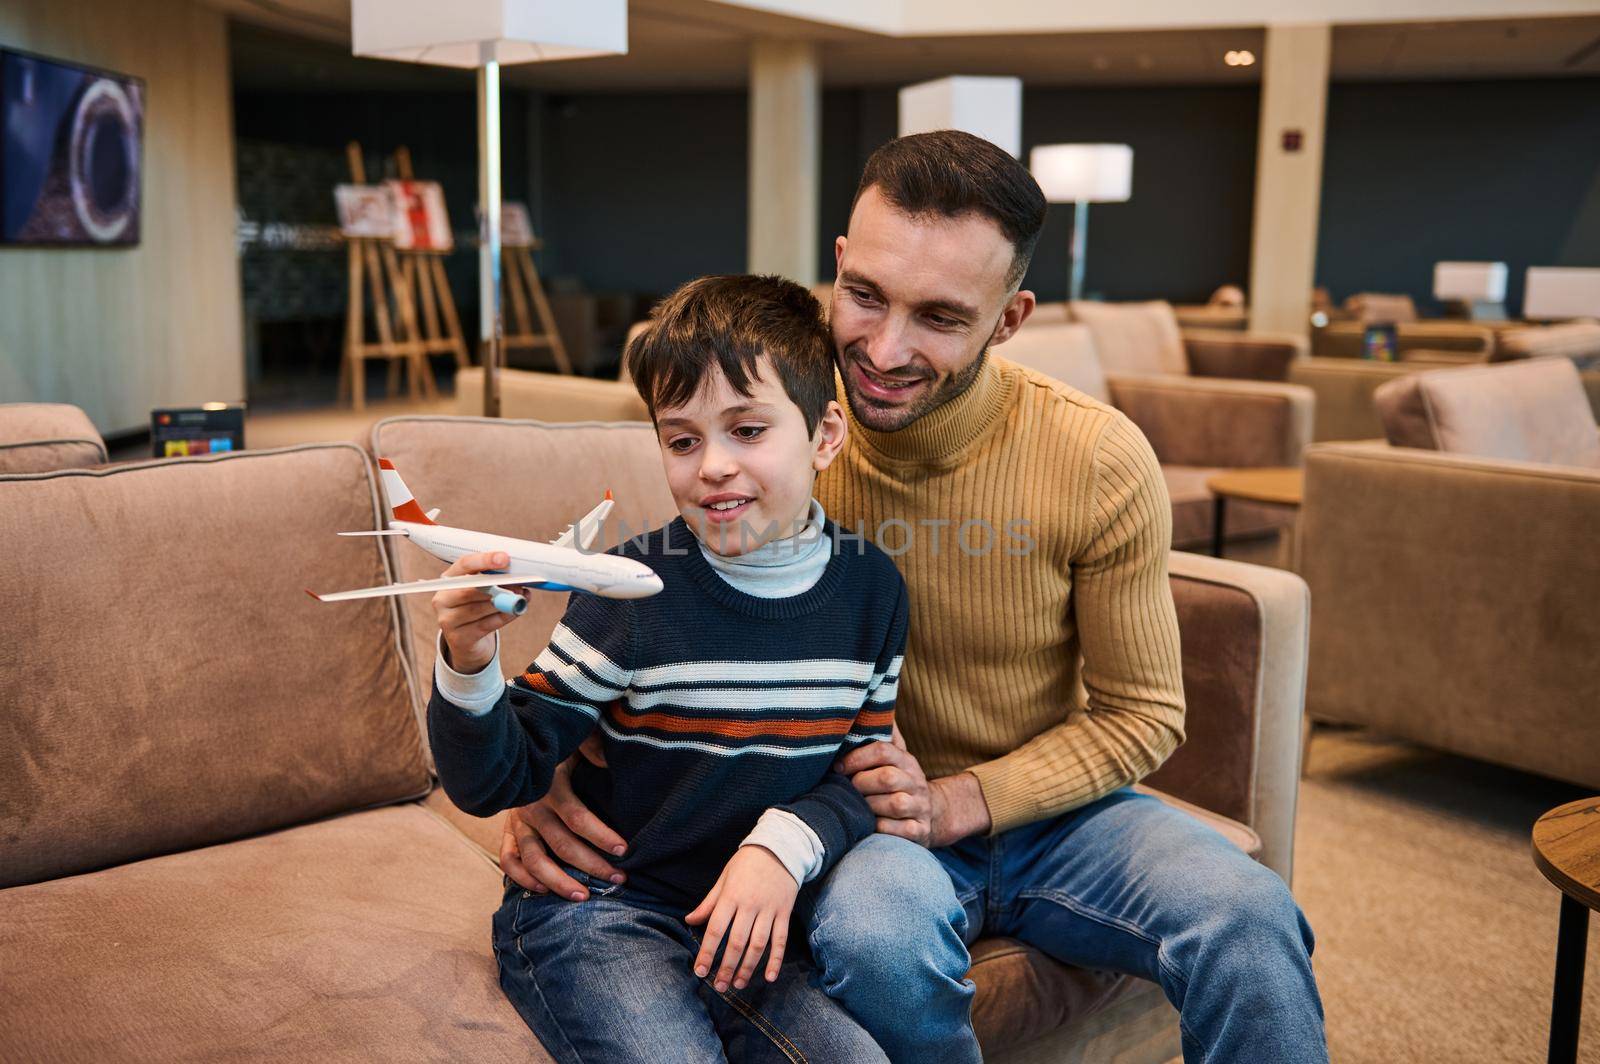 Handsome Caucasian young man playing toy plane with his adorable younger brother in VIP lounge at international airport departure terminal while waiting to board flight during family travel